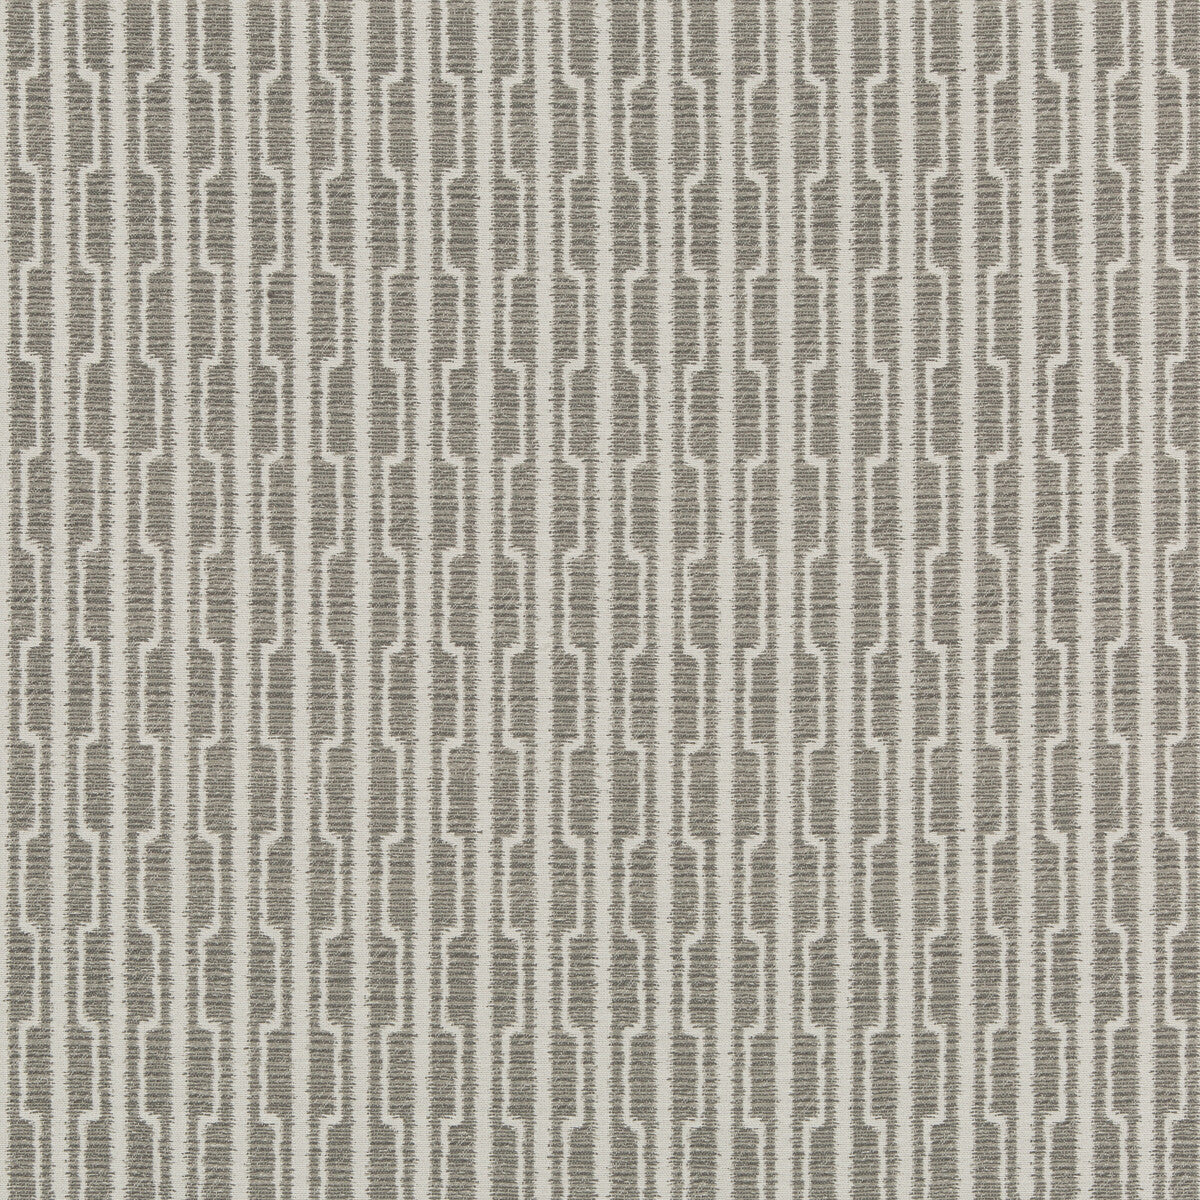 Kravet Design fabric in 36084-1101 color - pattern 36084.1101.0 - by Kravet Design in the Inside Out Performance Fabrics collection